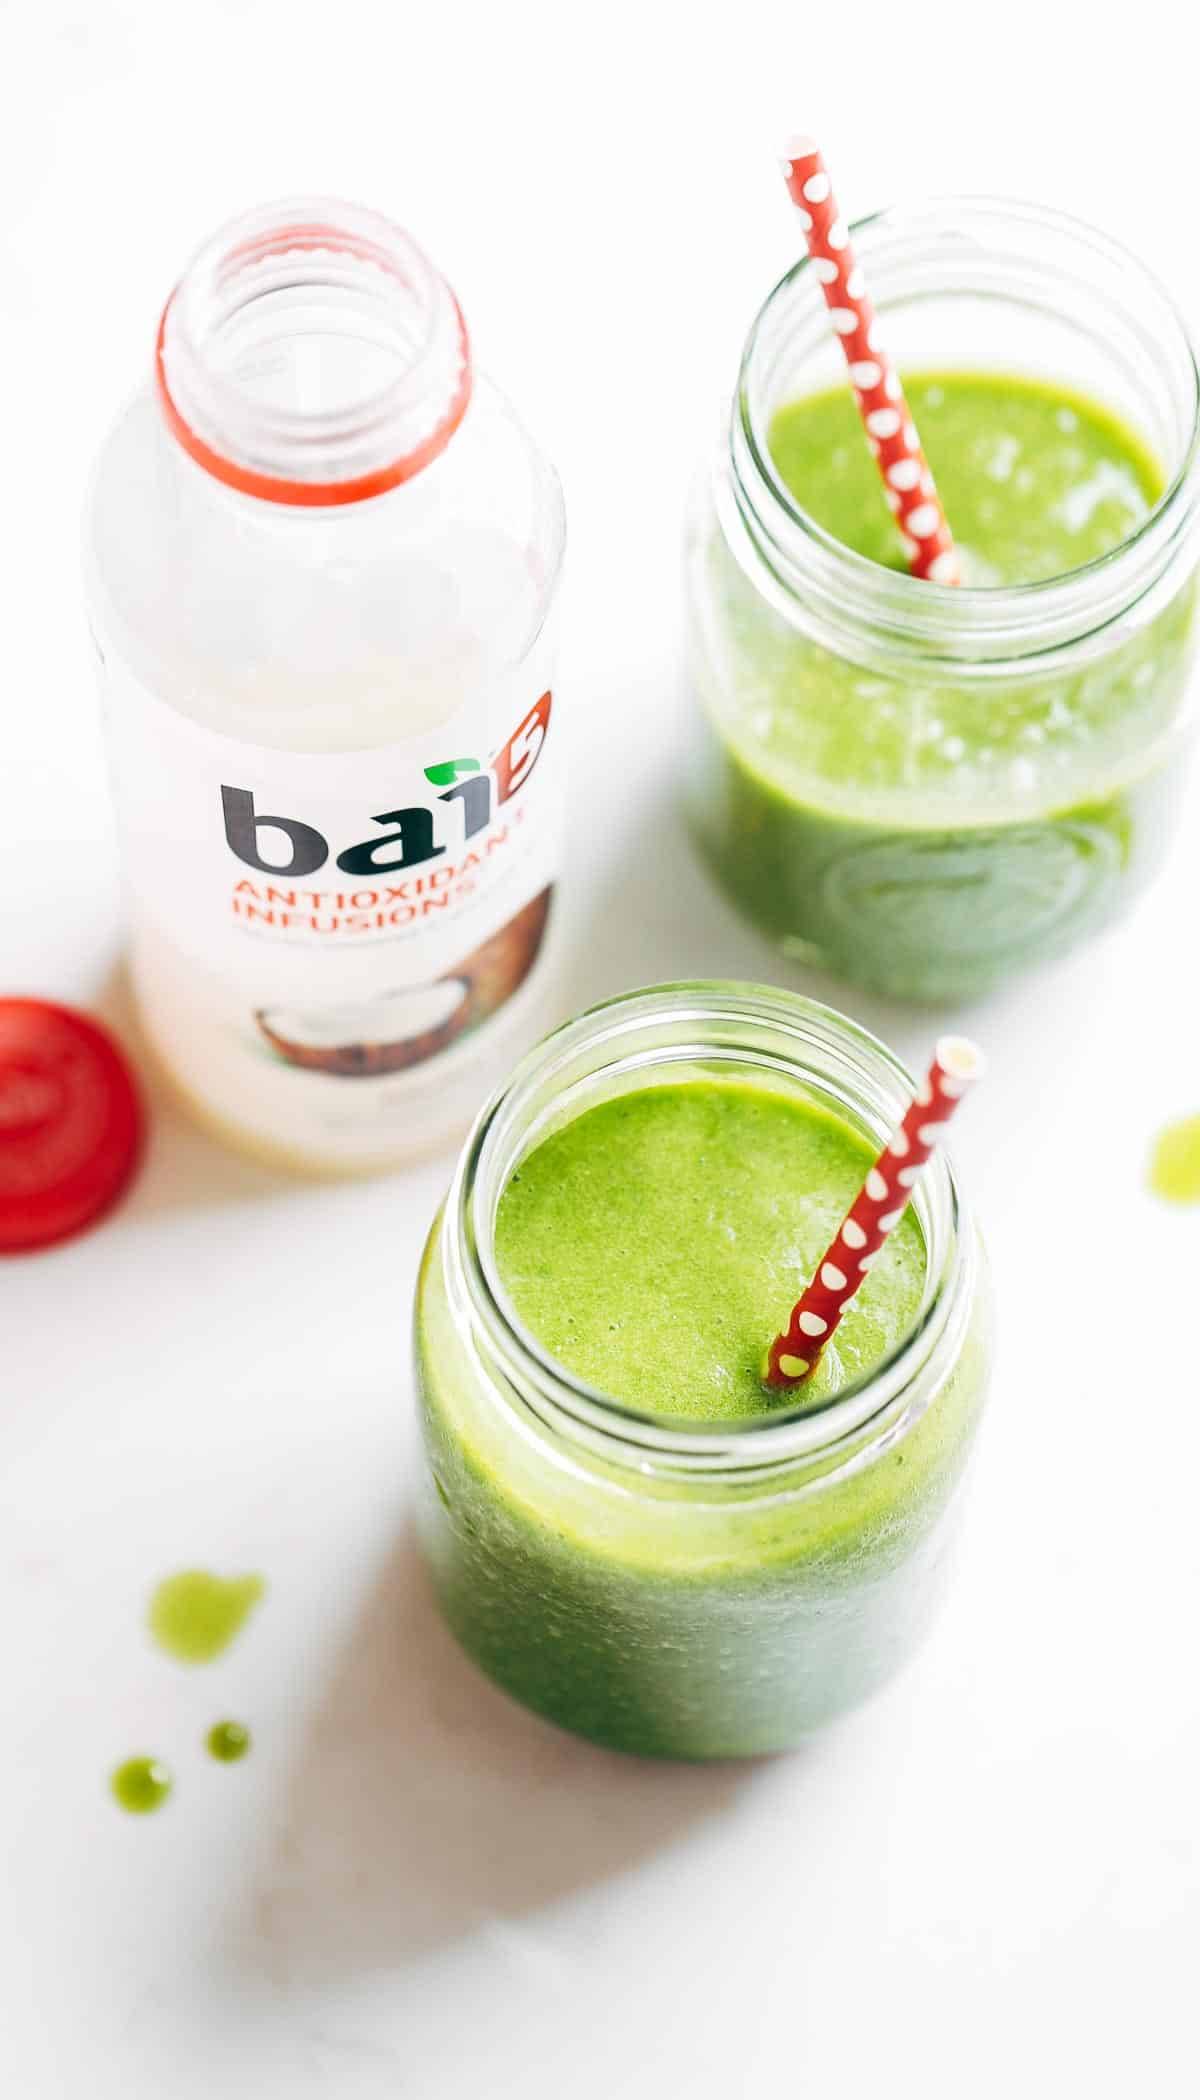 Bai5 Coconut Green Smoothies with straws.